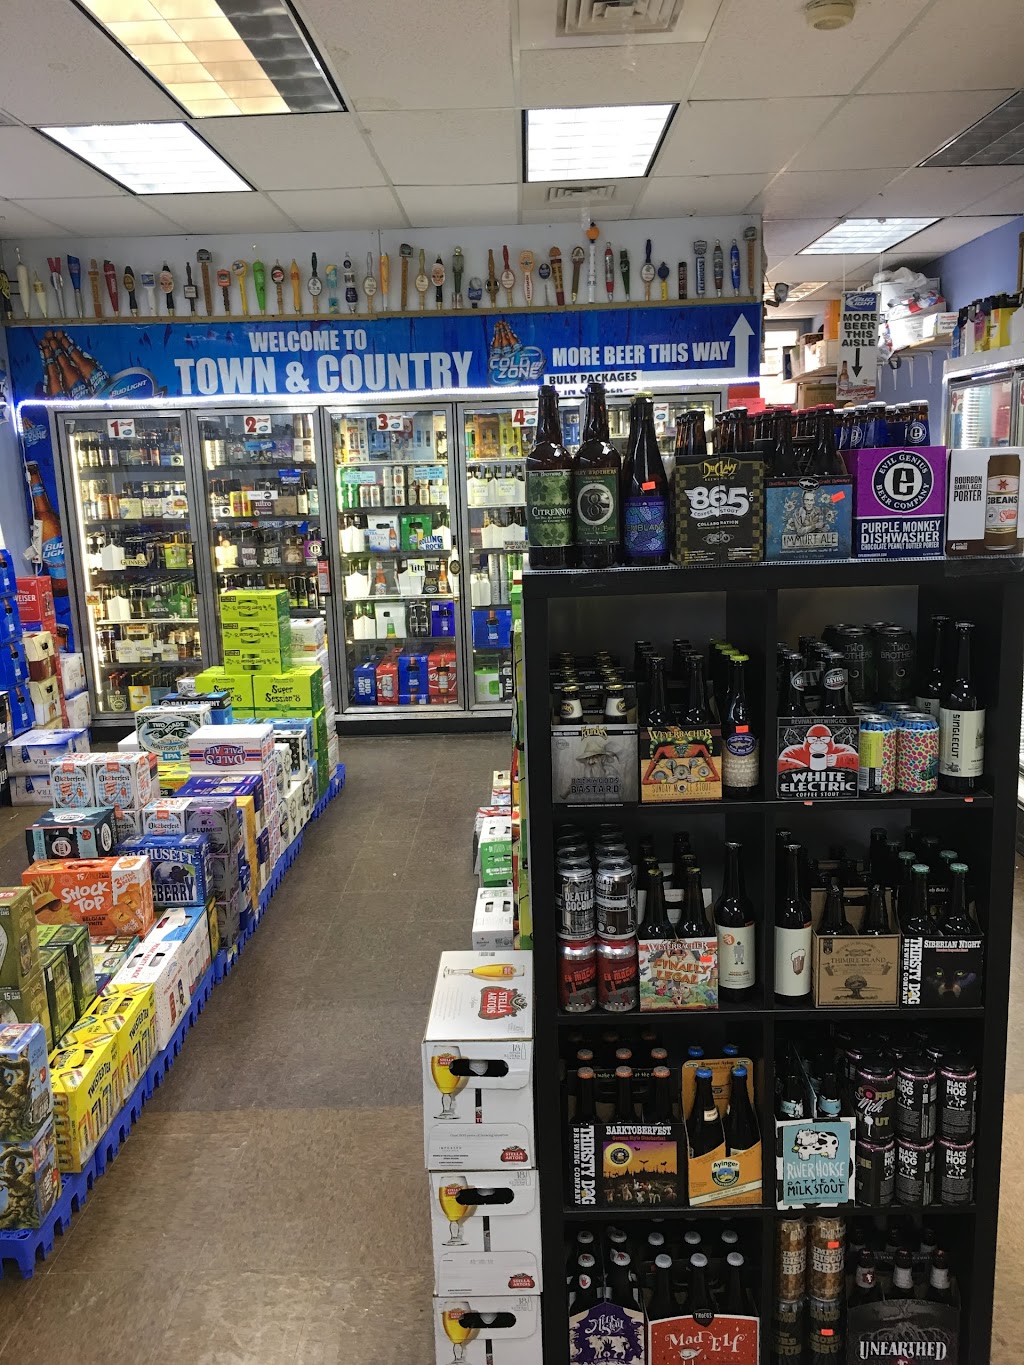 Town & Country Liquors | 696 Amity Rd # 9, Bethany, CT 06524 | Phone: (203) 393-0069